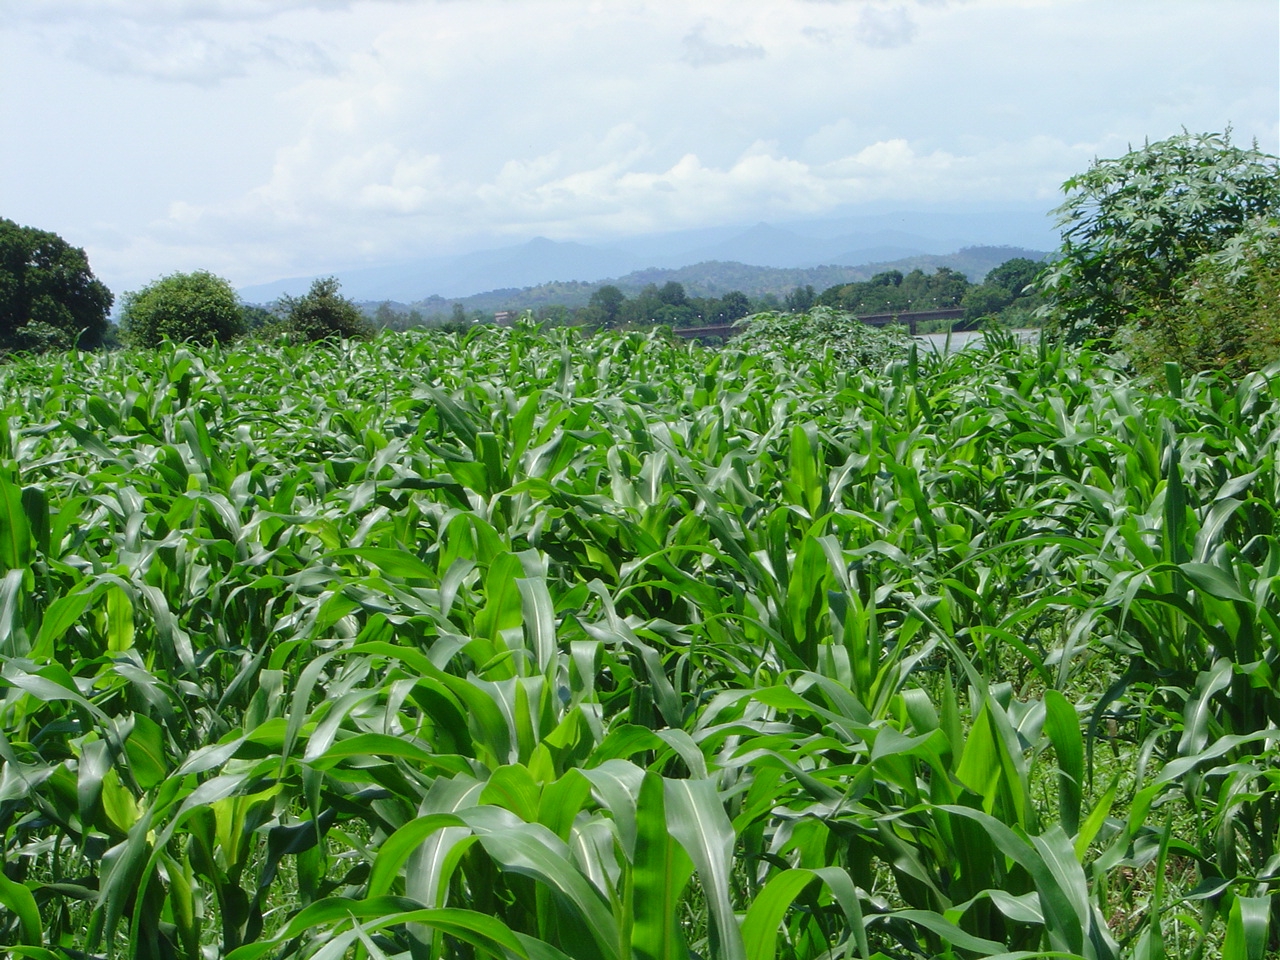 Budget For Agriculture Not Enough In Nigeria